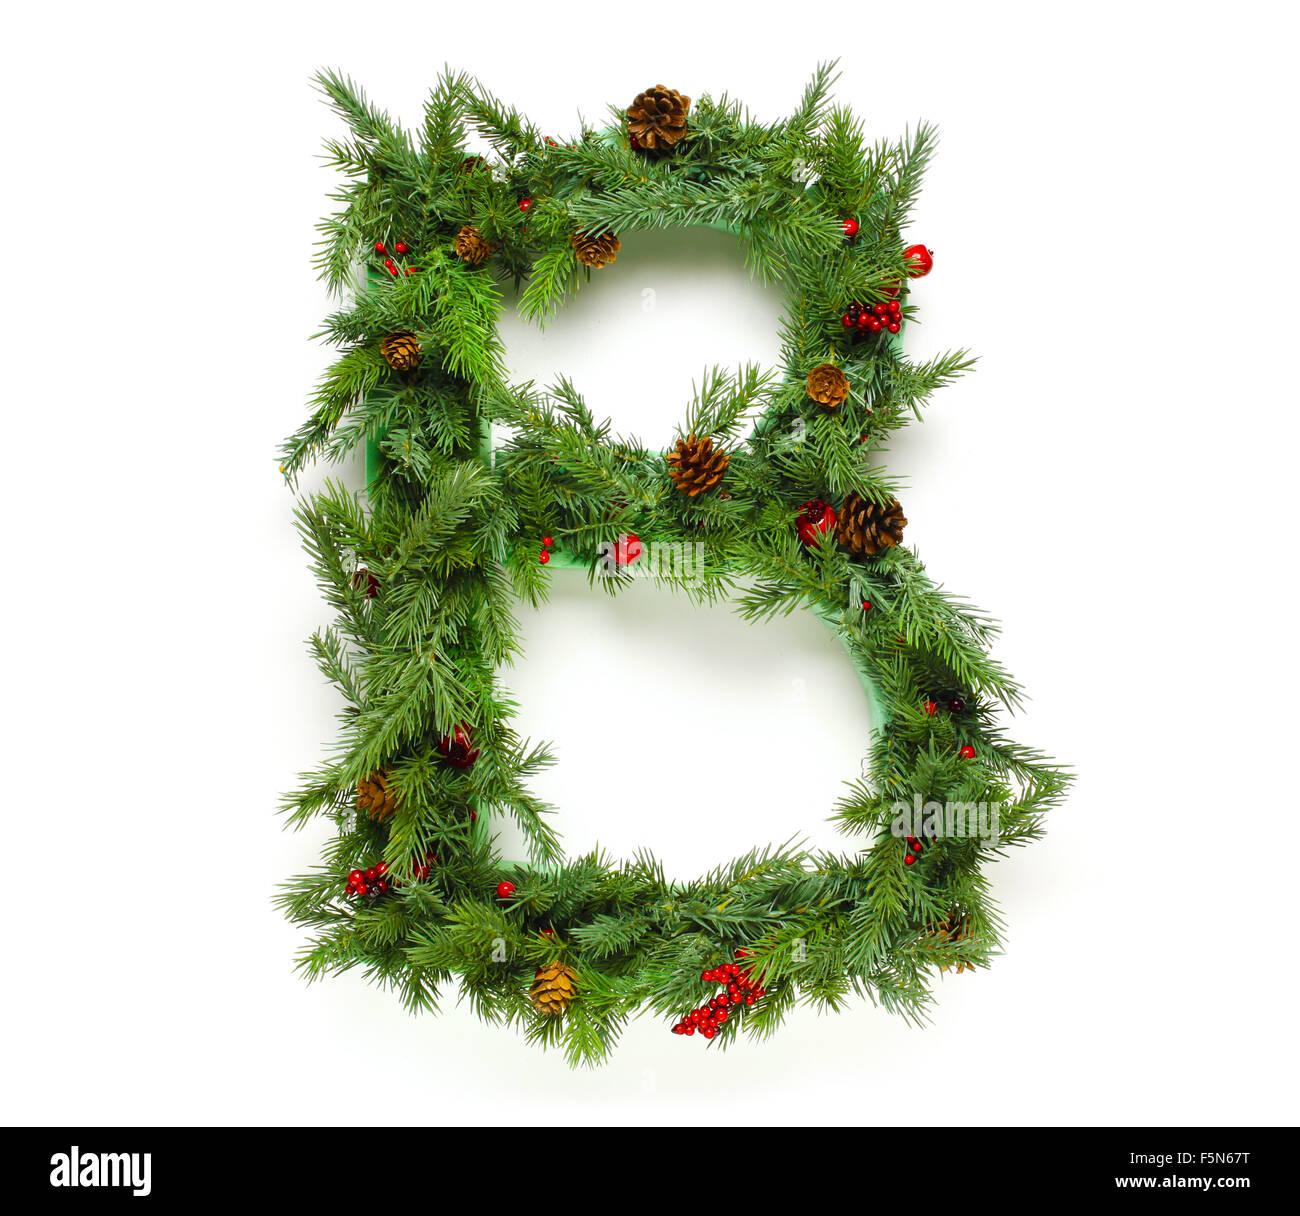 Christmas letters alphabet or font made of pine branches Stock Photo